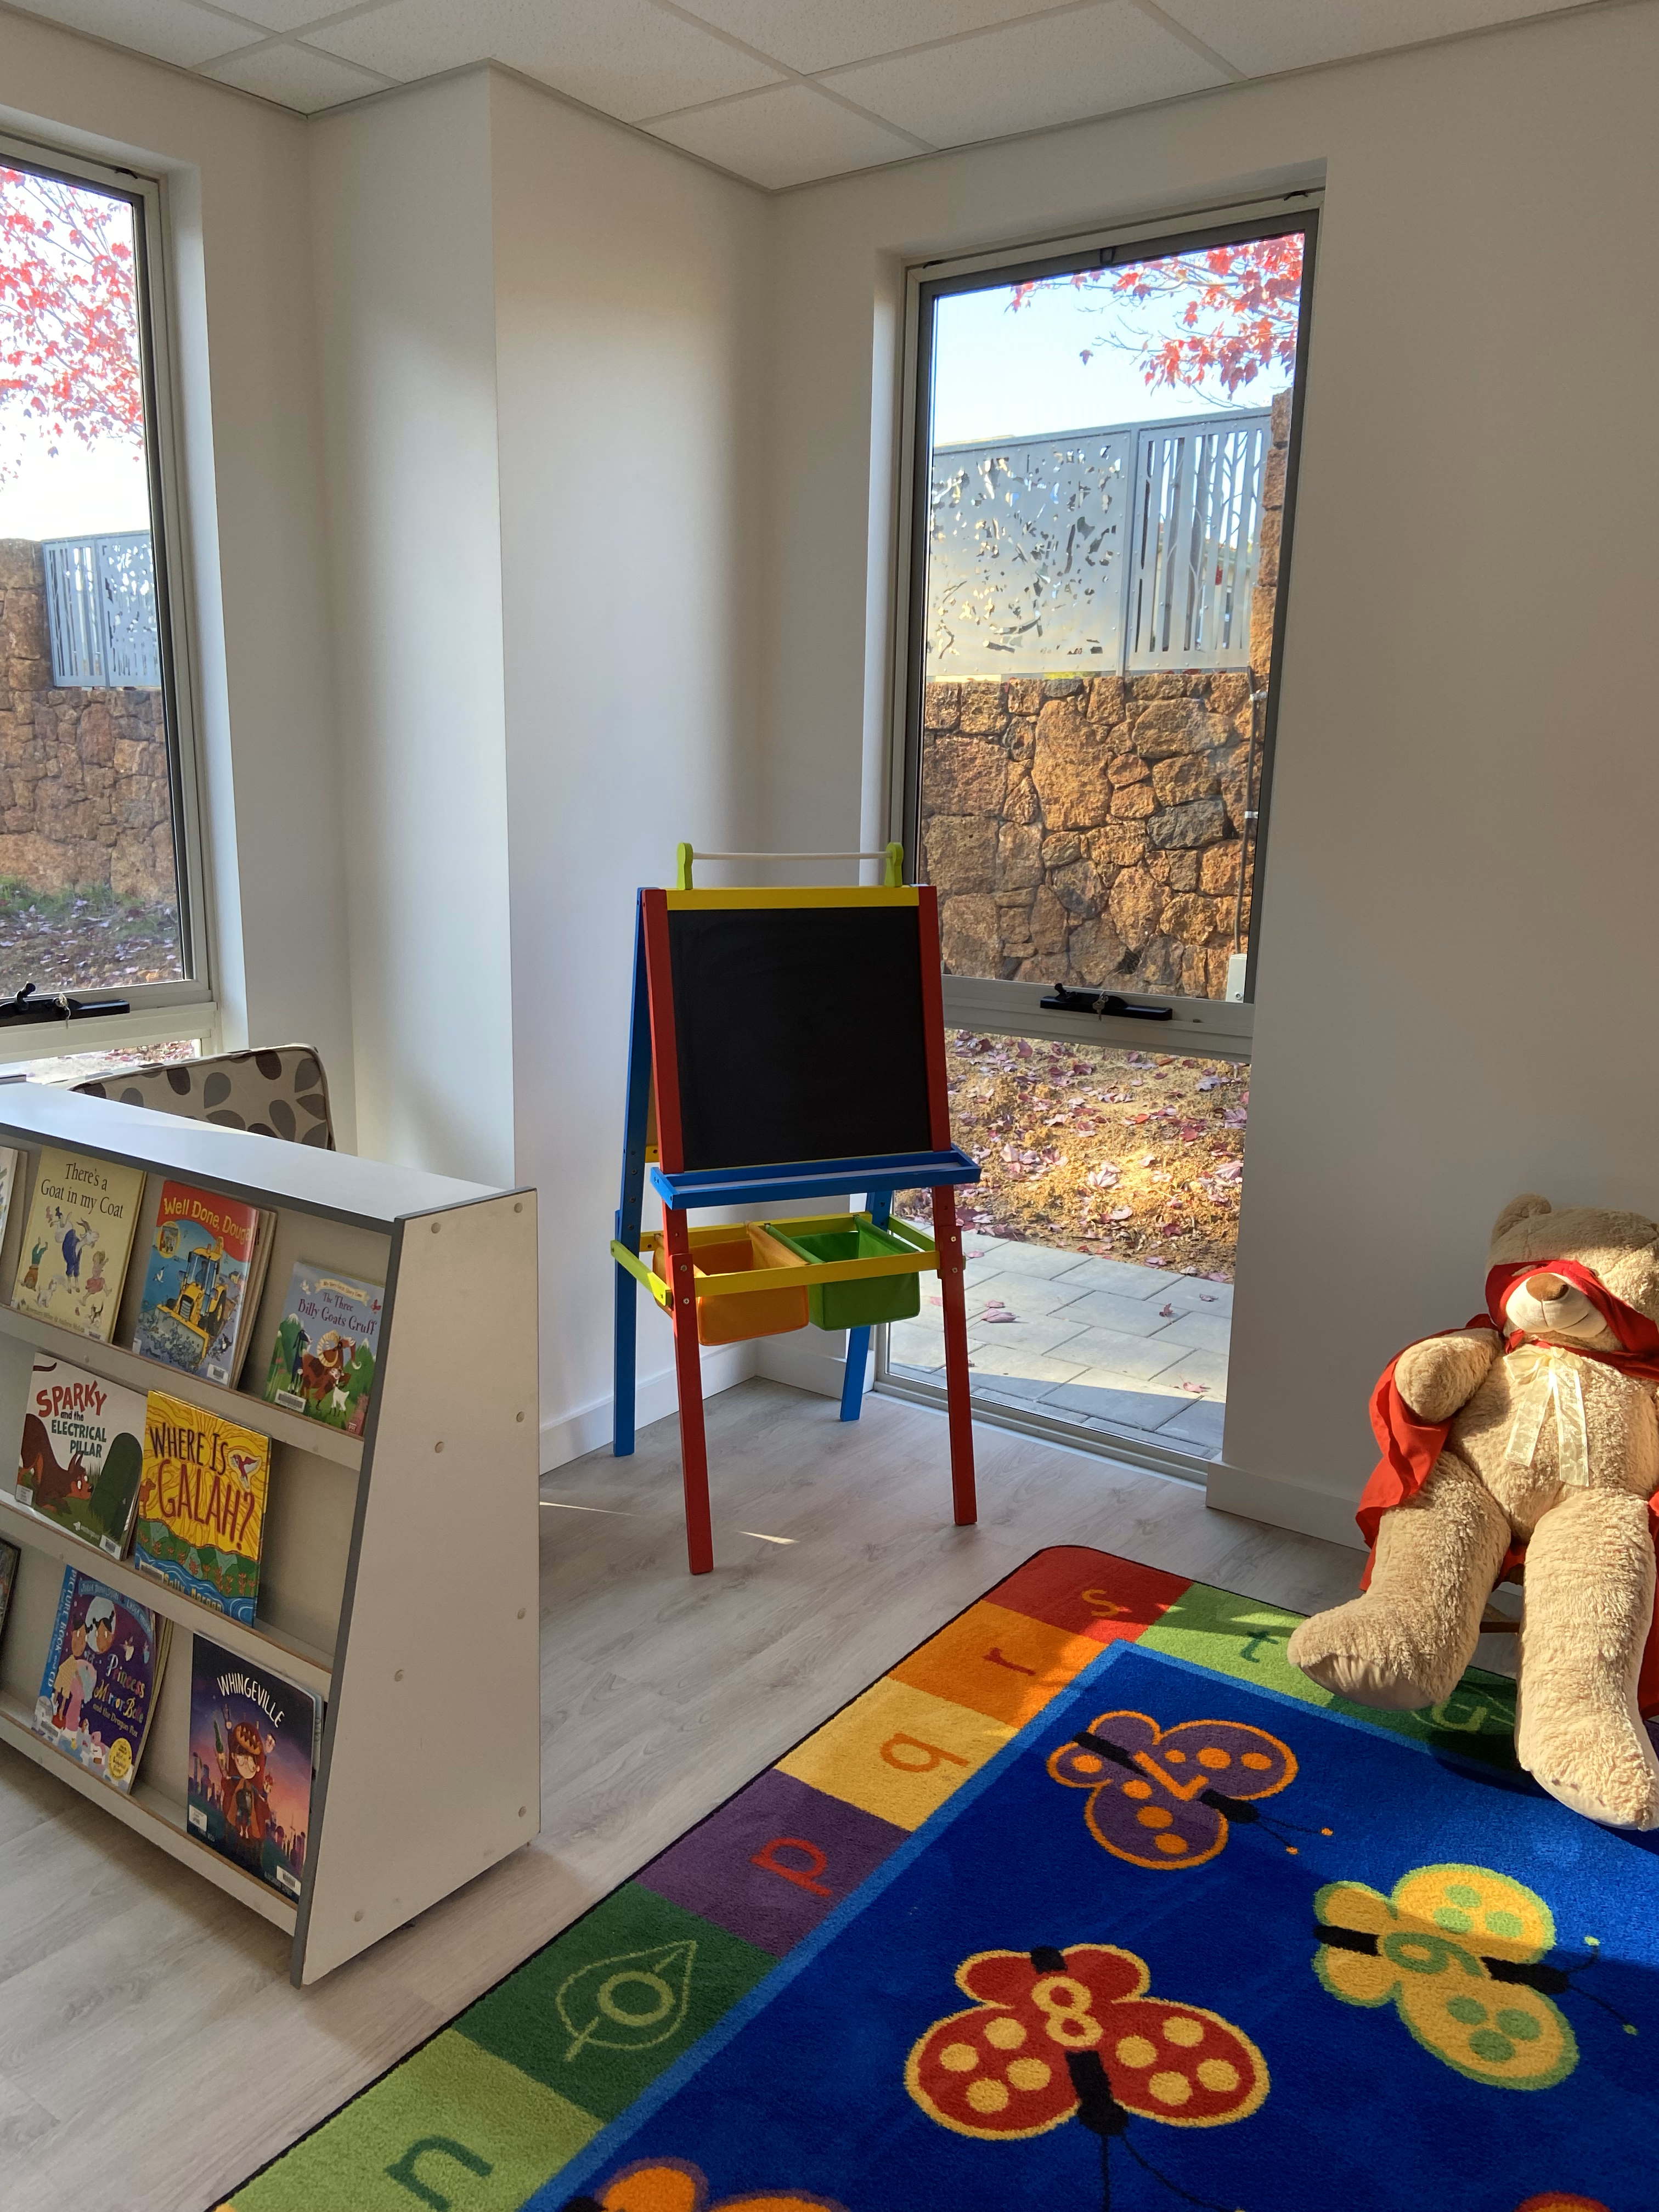 Interior photo of part of new Pemberton Library childrens corner, with bookshelf, colourful floor rug, art easel and teddy bear.